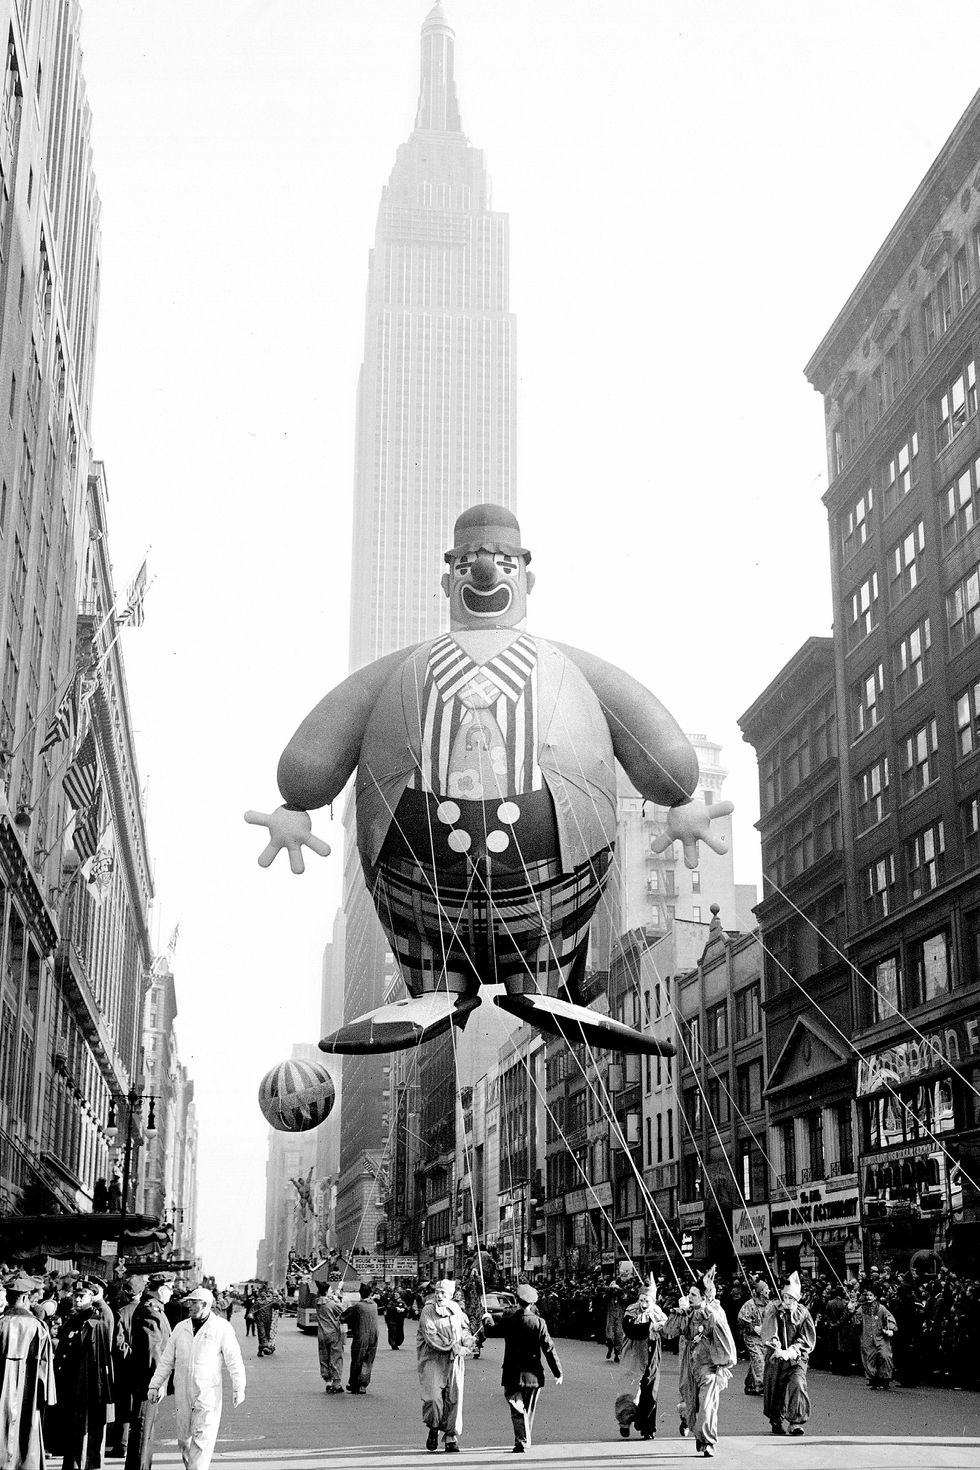 <p>Every year millions of Americans tune in to watch the Macy's Thanksgiving Parade, but did you know that the parade has European origins? In 1924, the store's immigrant employees decided to celebrate the beginning of the Christmas season like they would have in their European homelands—with a parade with  knights, jugglers and clowns. The balloons weren't introduced until 1927.</p>